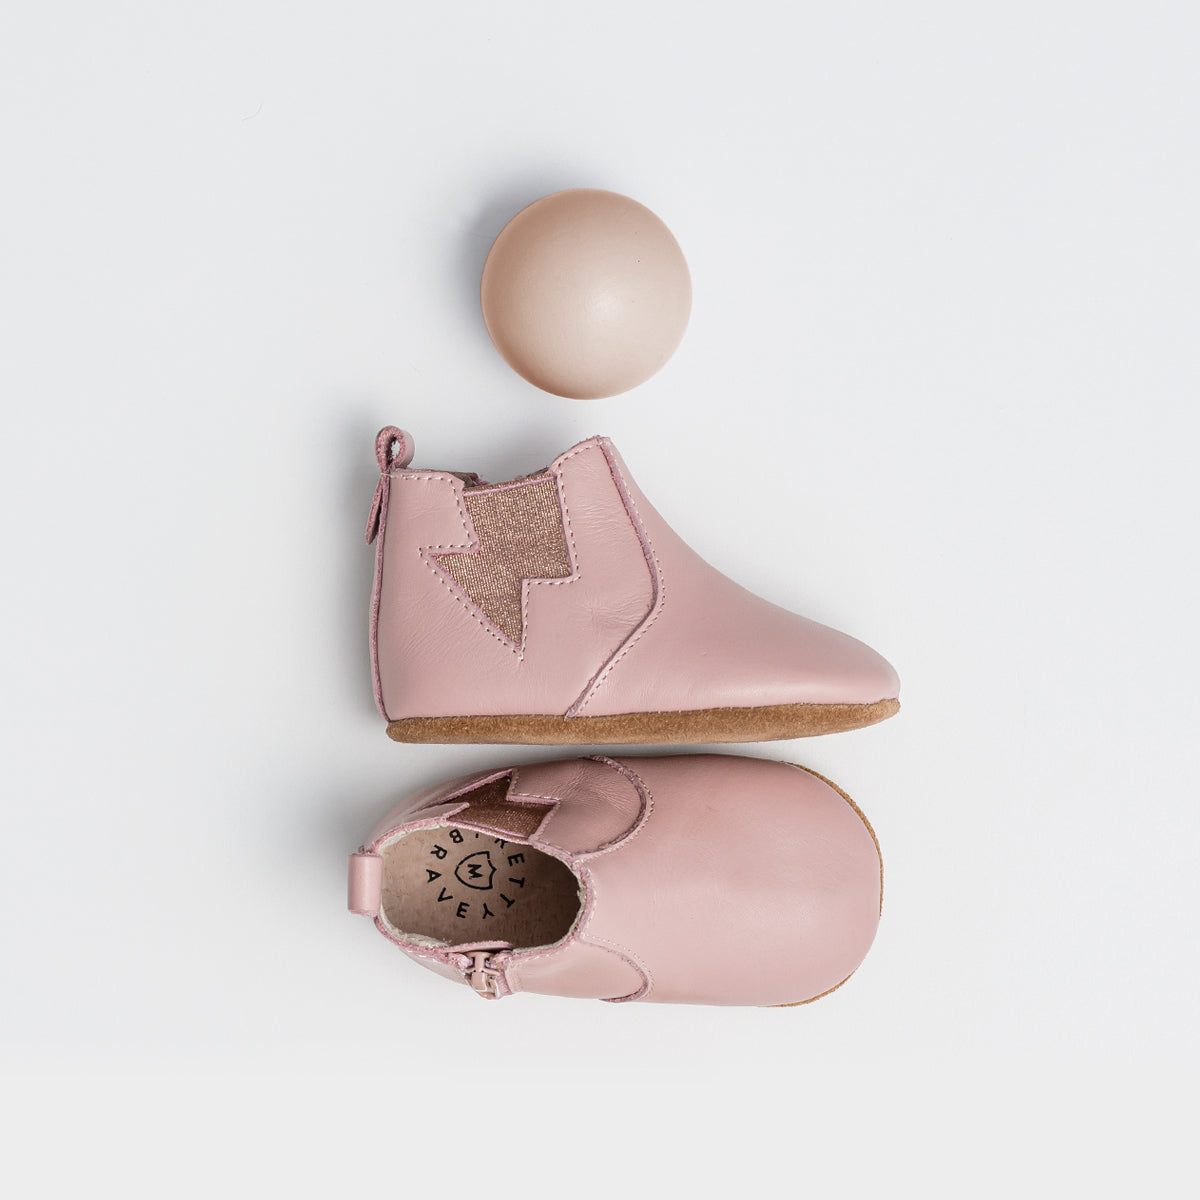 Pair of baby boot in colour blush with lightning detail next to wooden ball